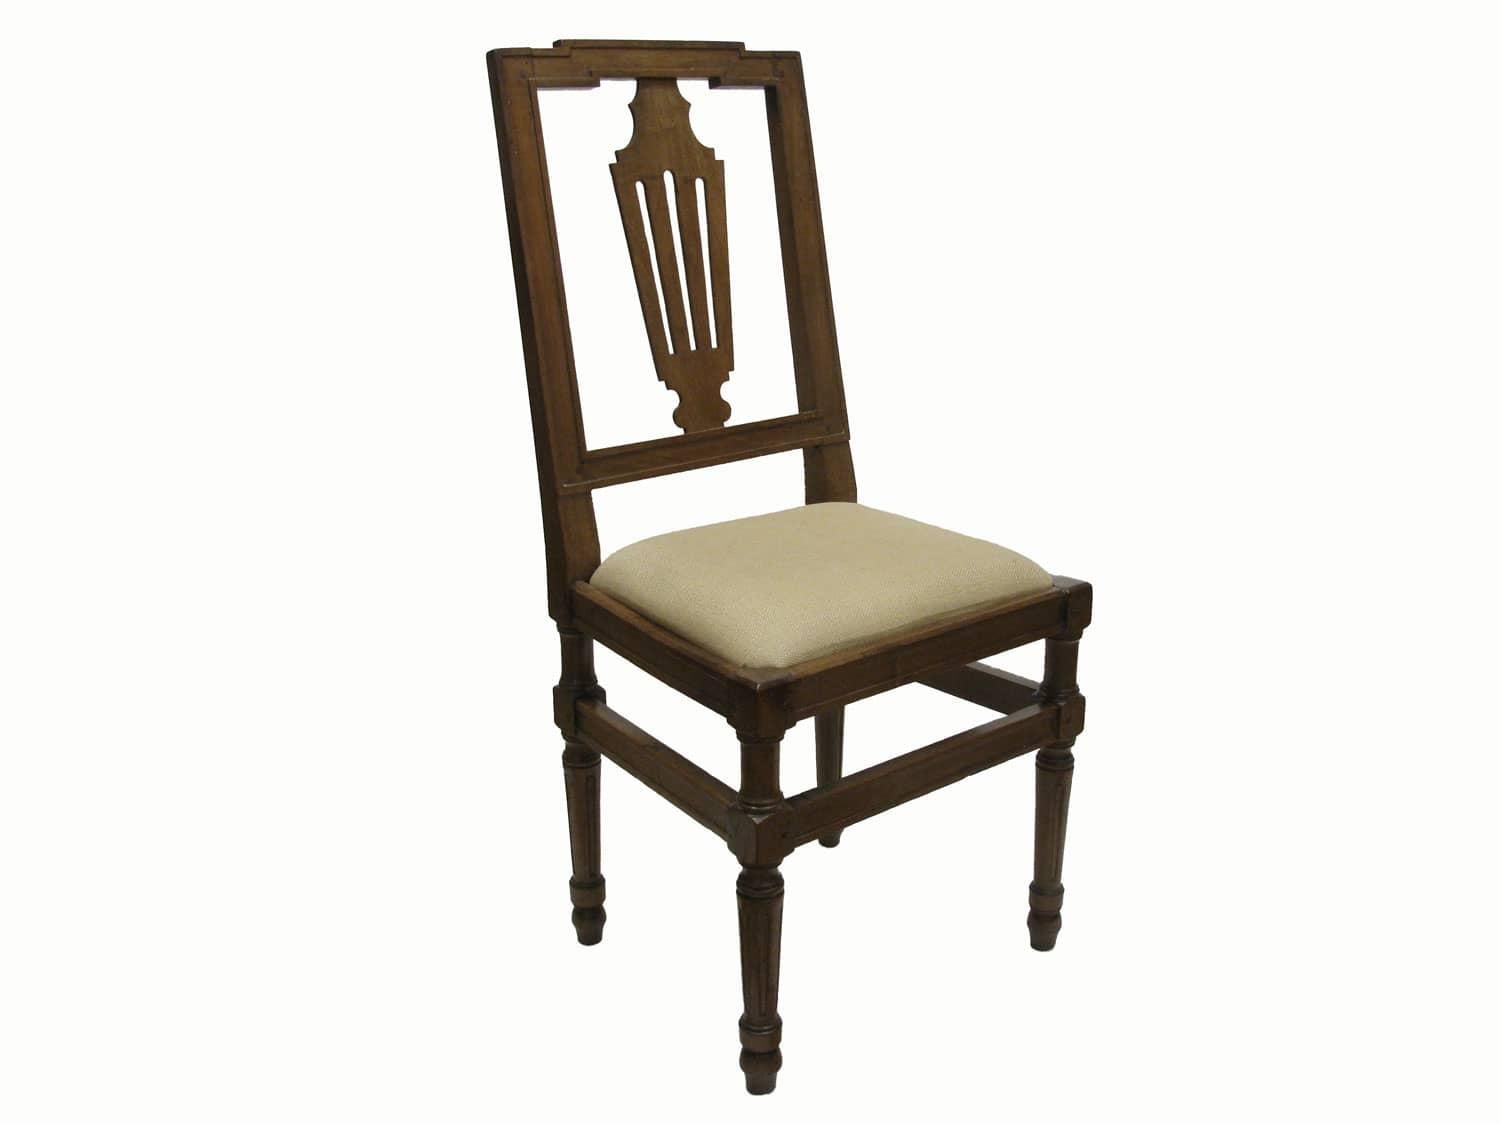 Four late 19th century Italian walnut chairs, a group of four Piedmontese chairs, solid blond walnut structure, in good condition, high back decorated with stylized patterns. turned and fluted legs, beige color upholstery. 
Warm wax polish